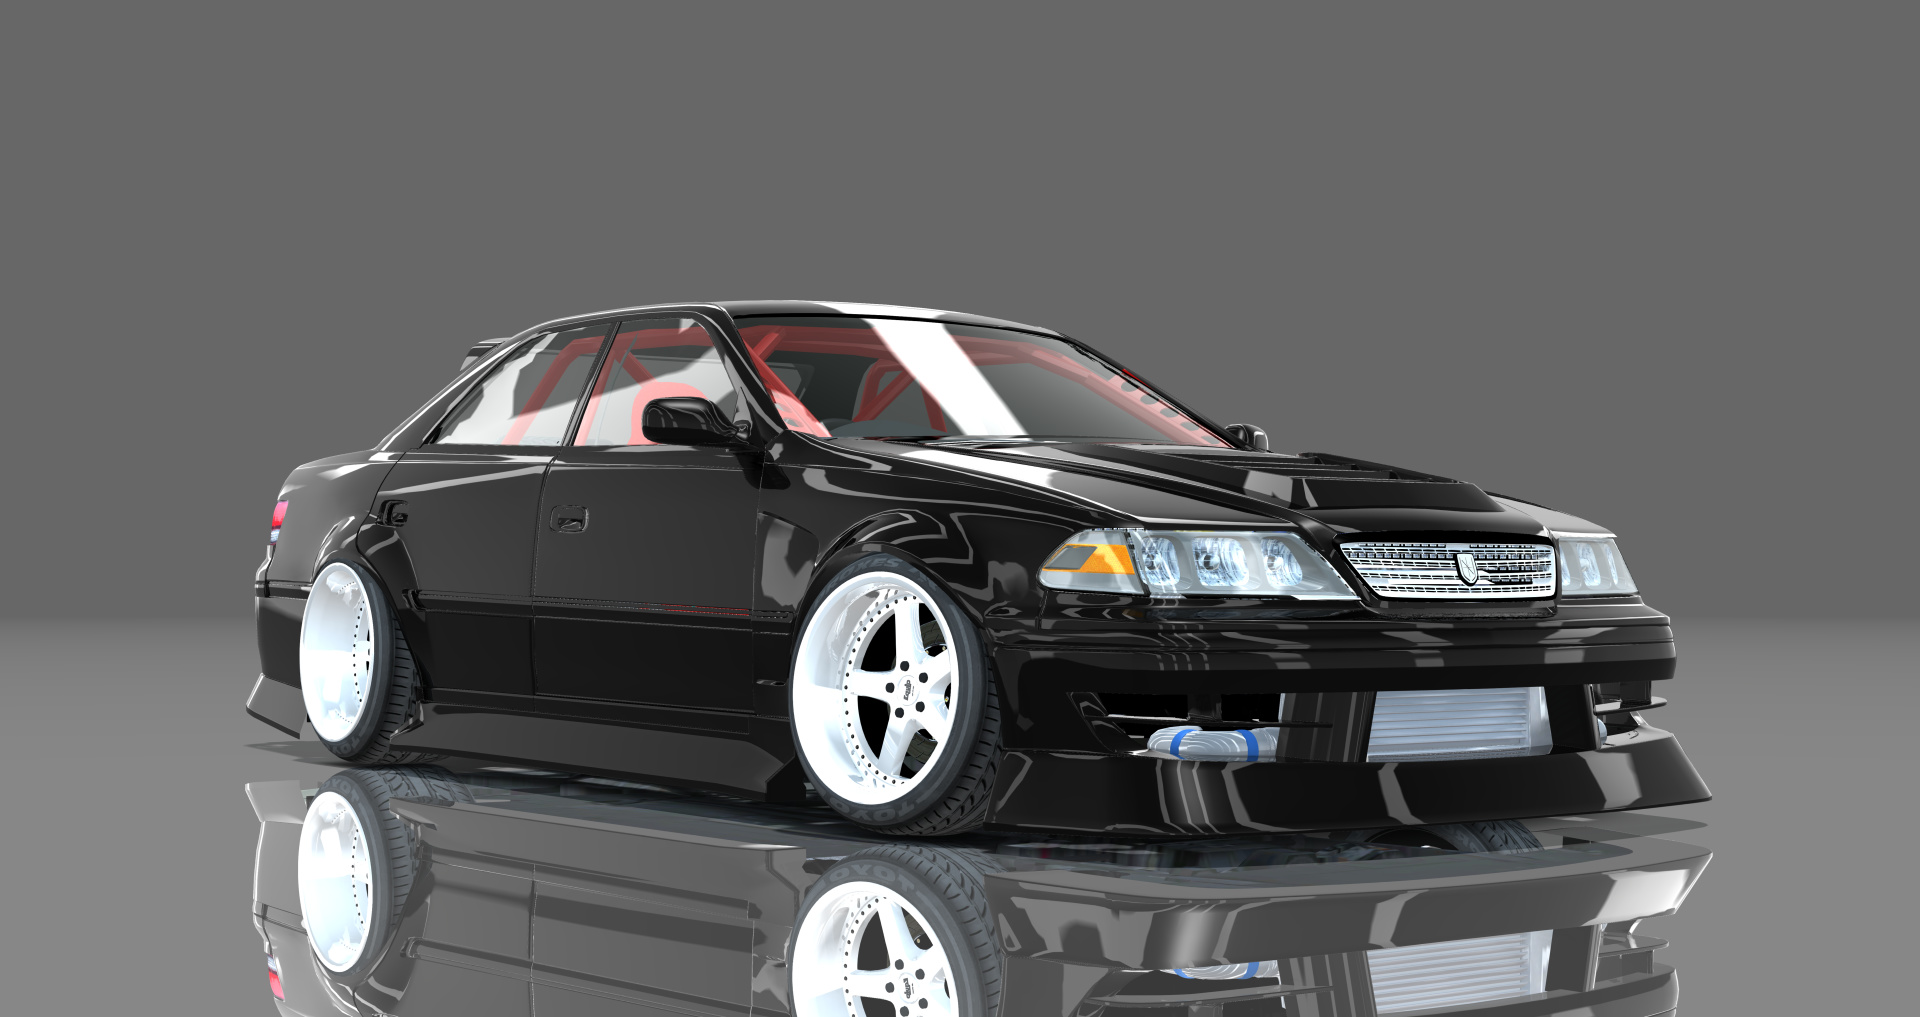 DTP Toyota JZX100 Mark2 Preview Image